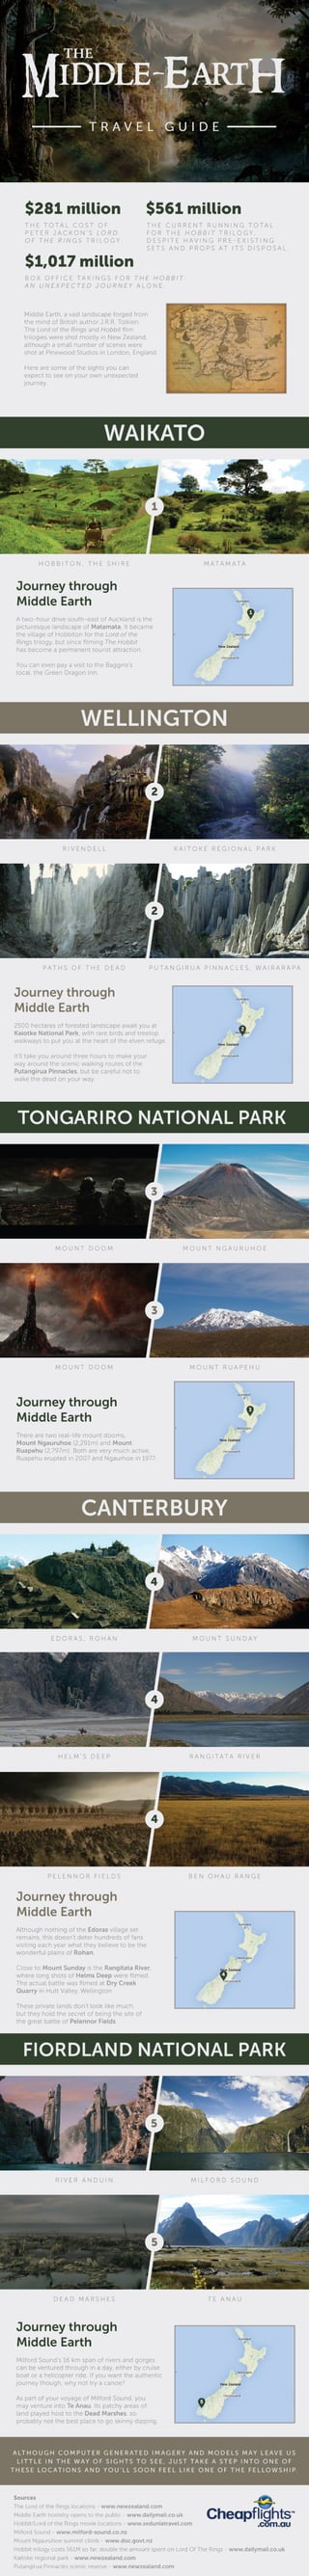 Middle earth-travel-guide